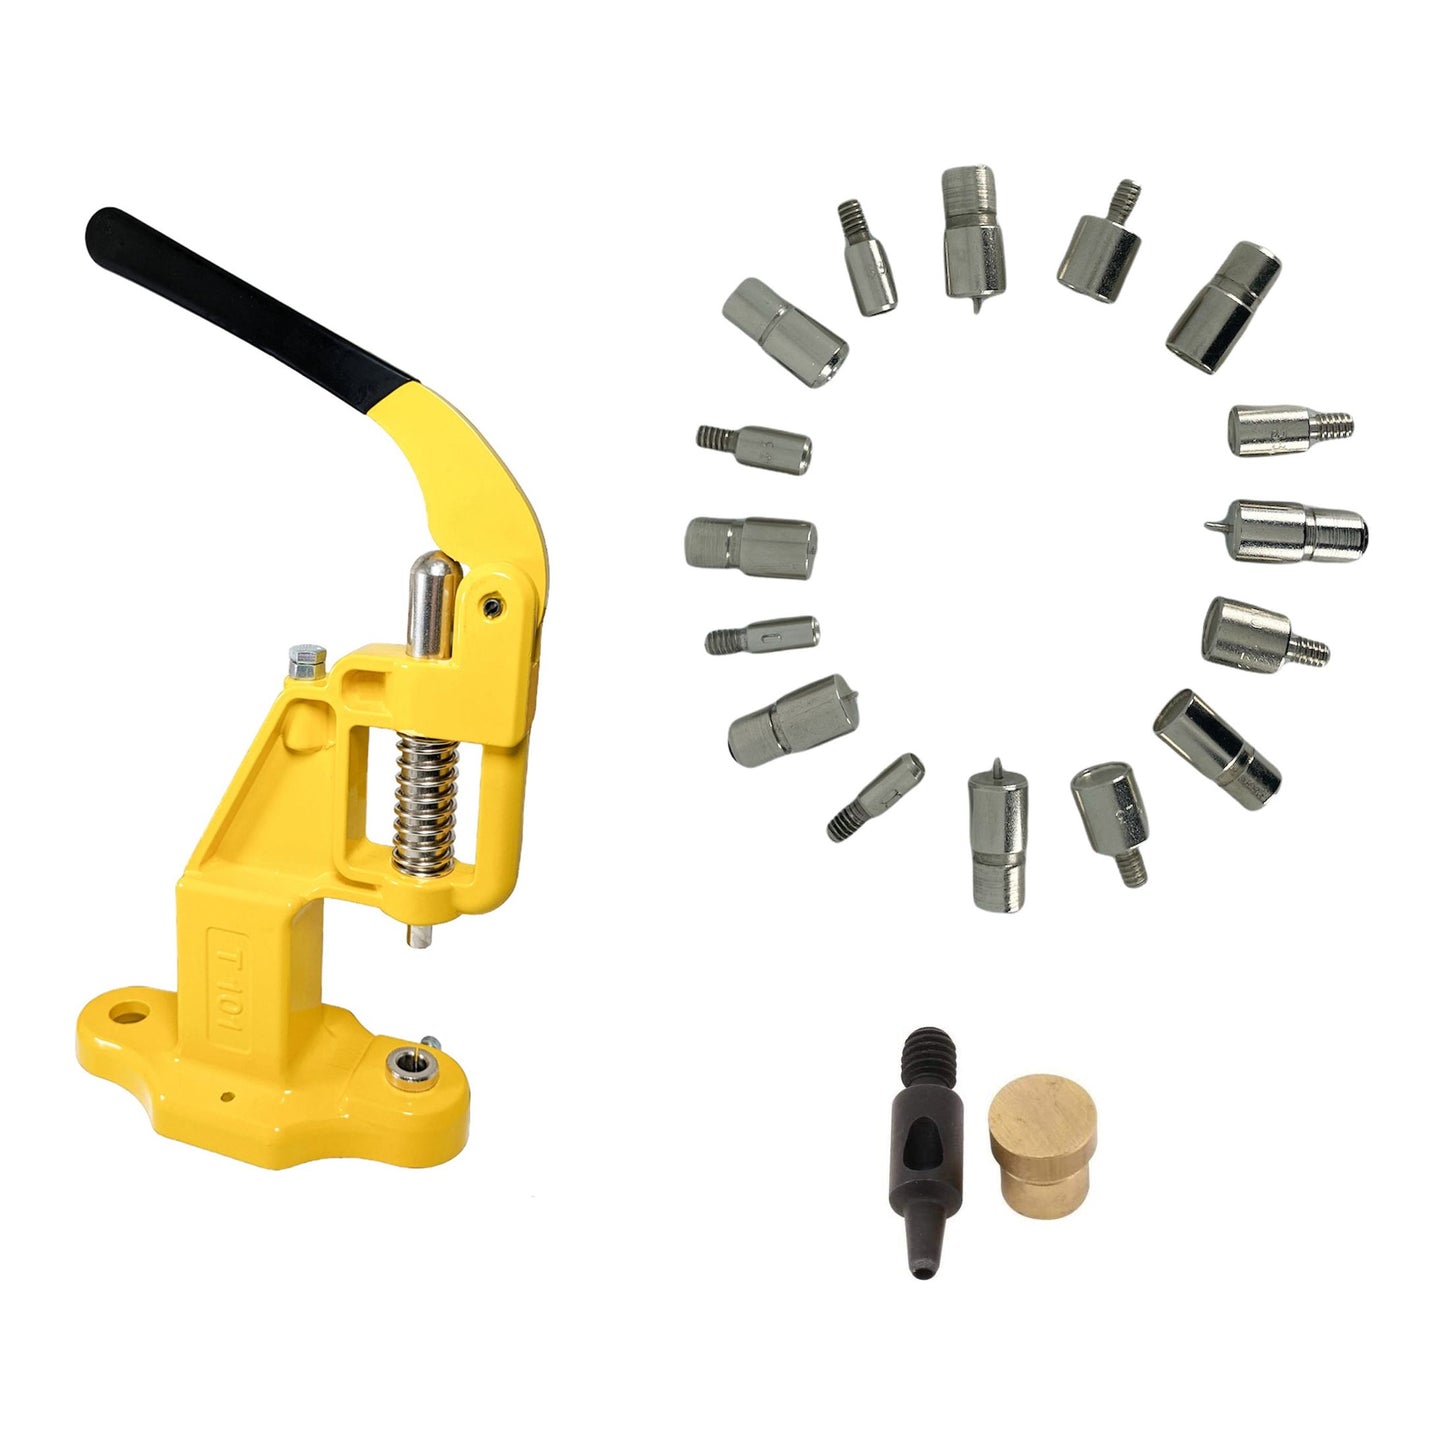 Large Essential Rivet Setting Kit with Hand Press Machine 8 Rivet Dies and 2 mm Hole Punch